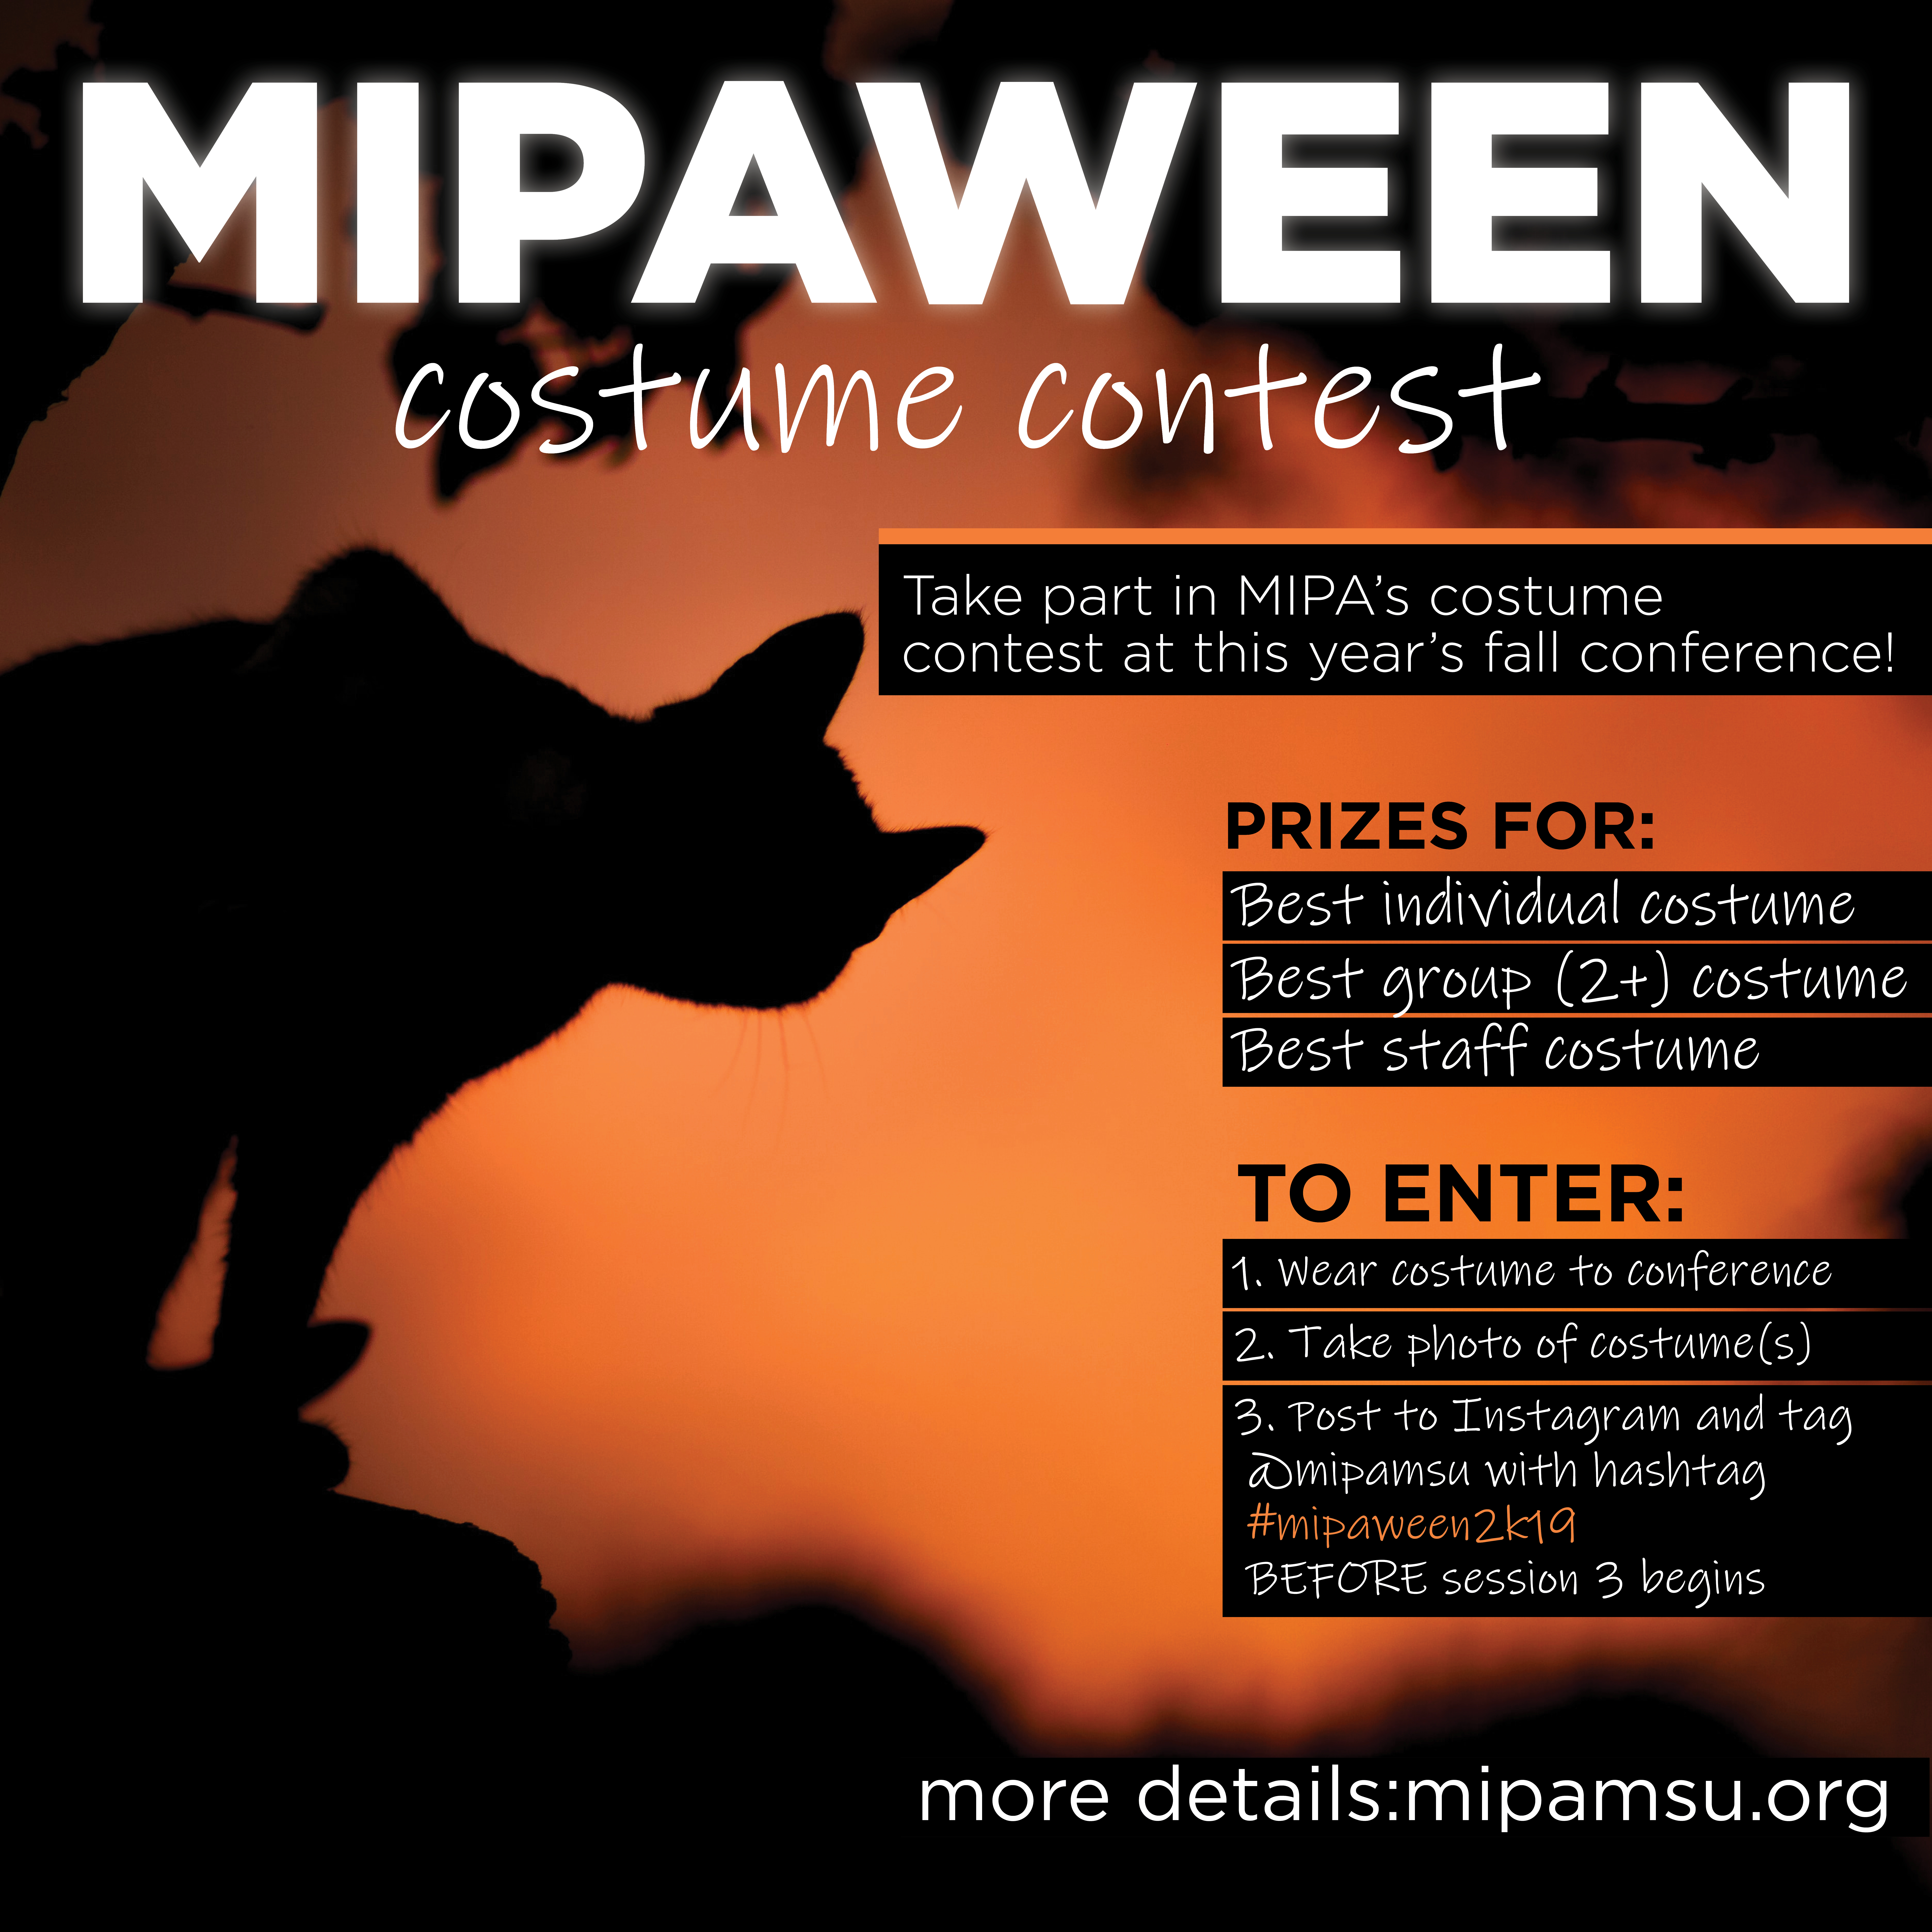 Participate in the Fall Conference MIPAween Costume Contest!